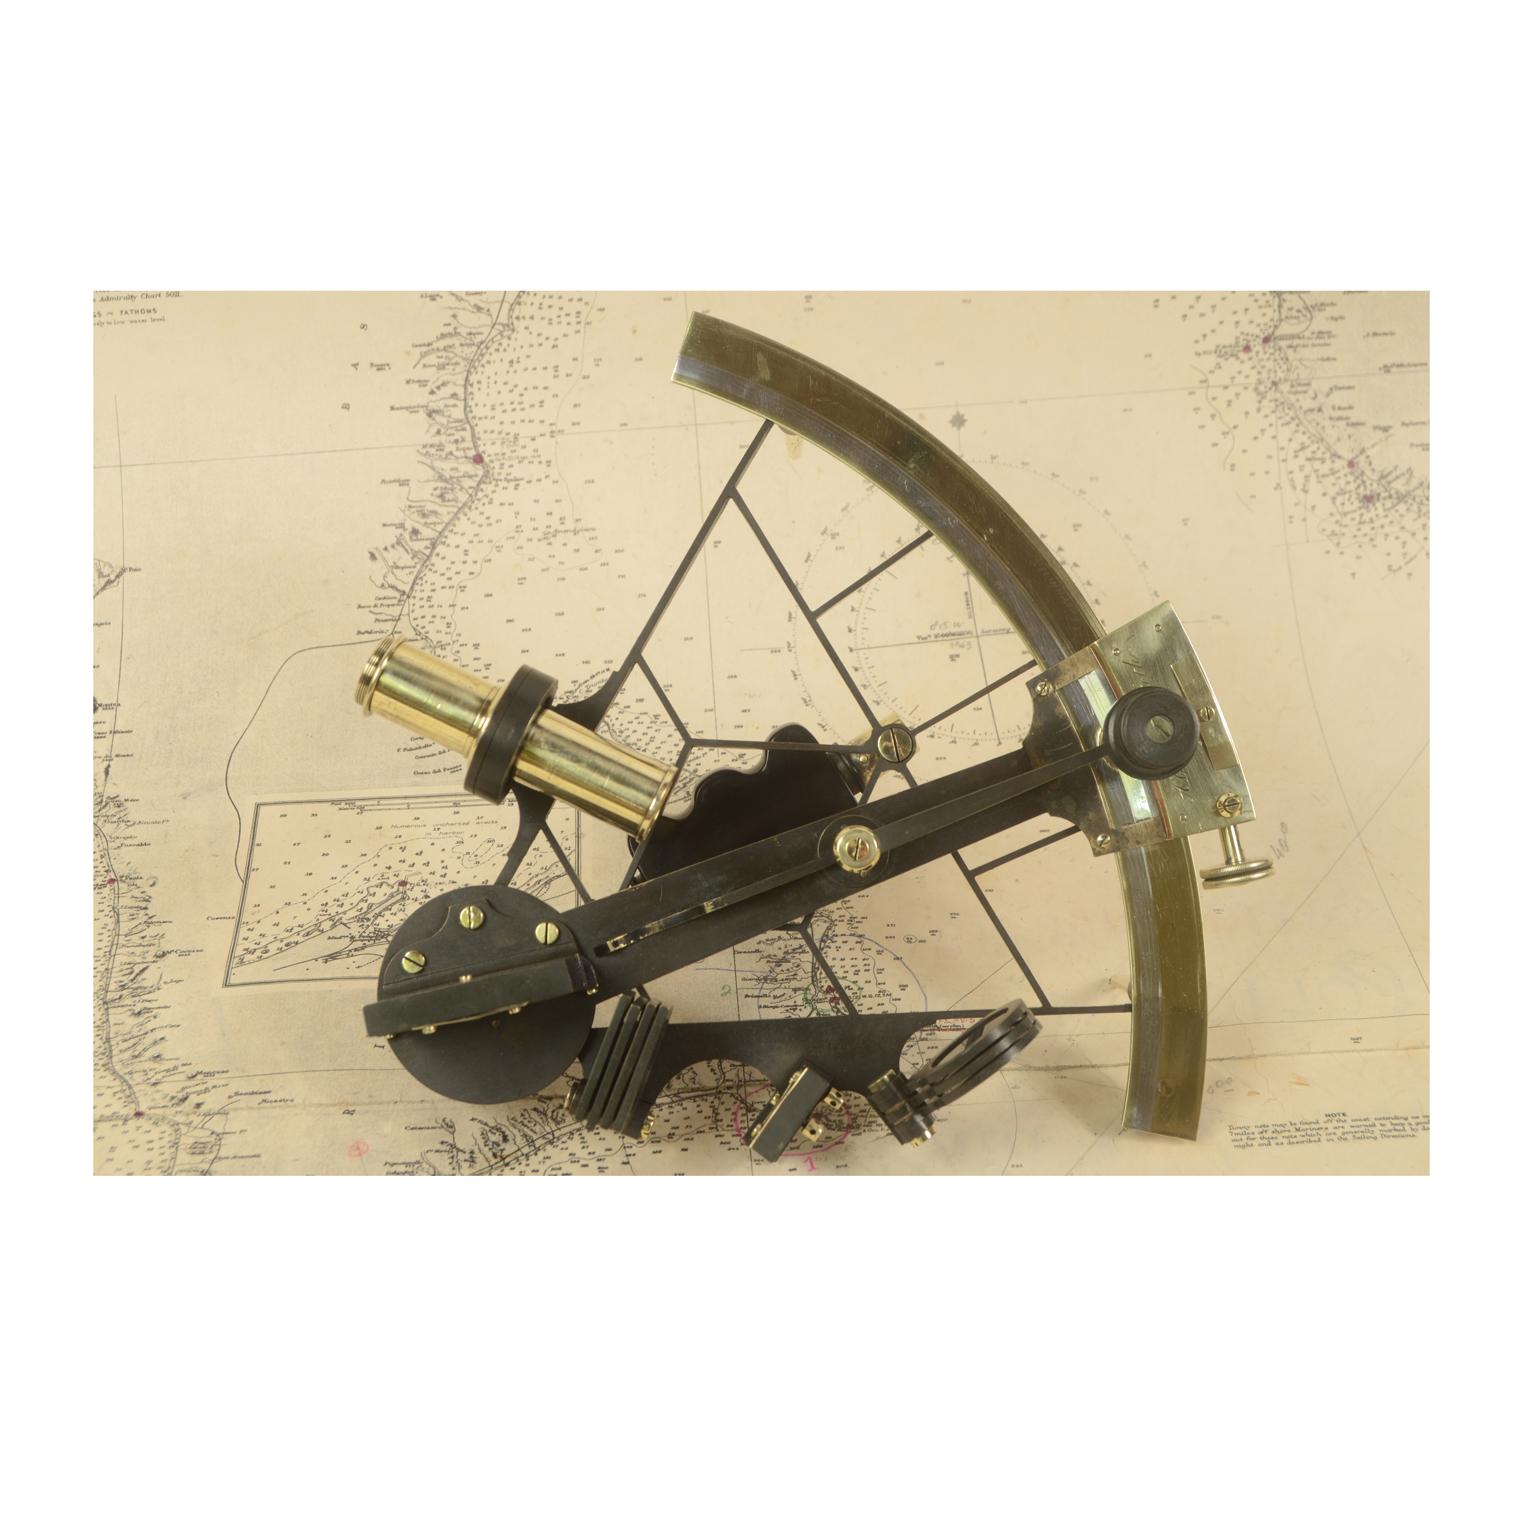 Brass Sextant Signed WC COX Devonport, Mid-19th Century 12